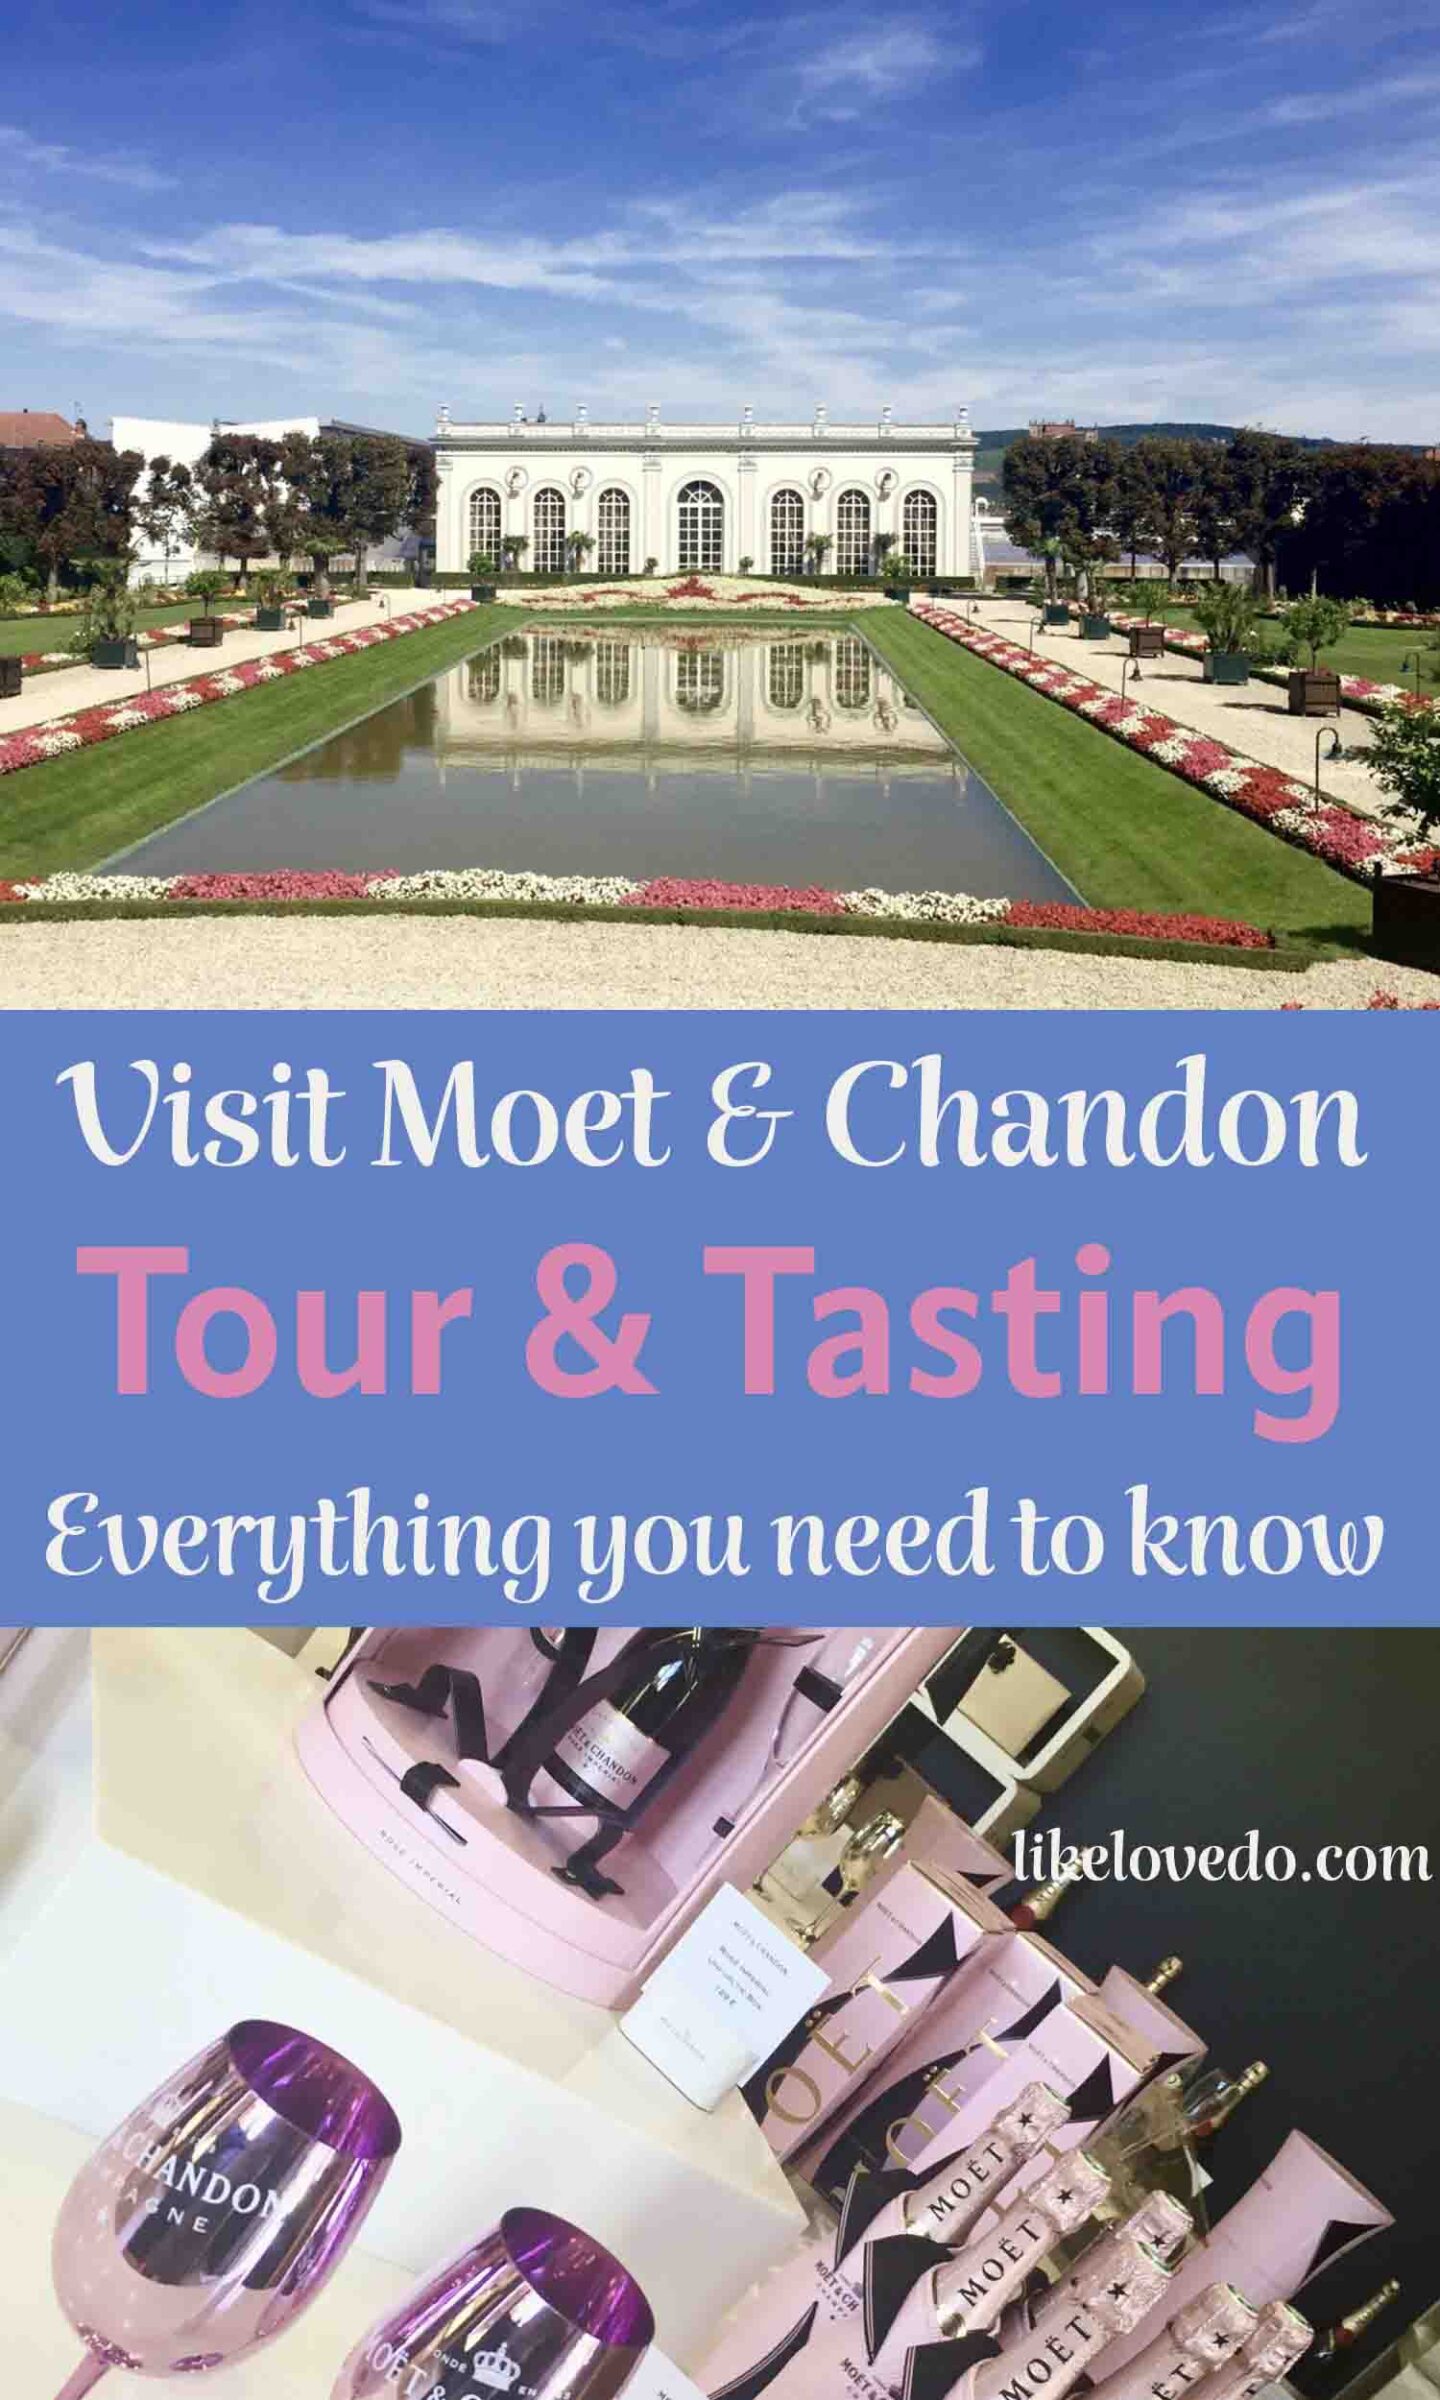 Moet et Chandon Epernay tours and tasting everything you need to know before you go.